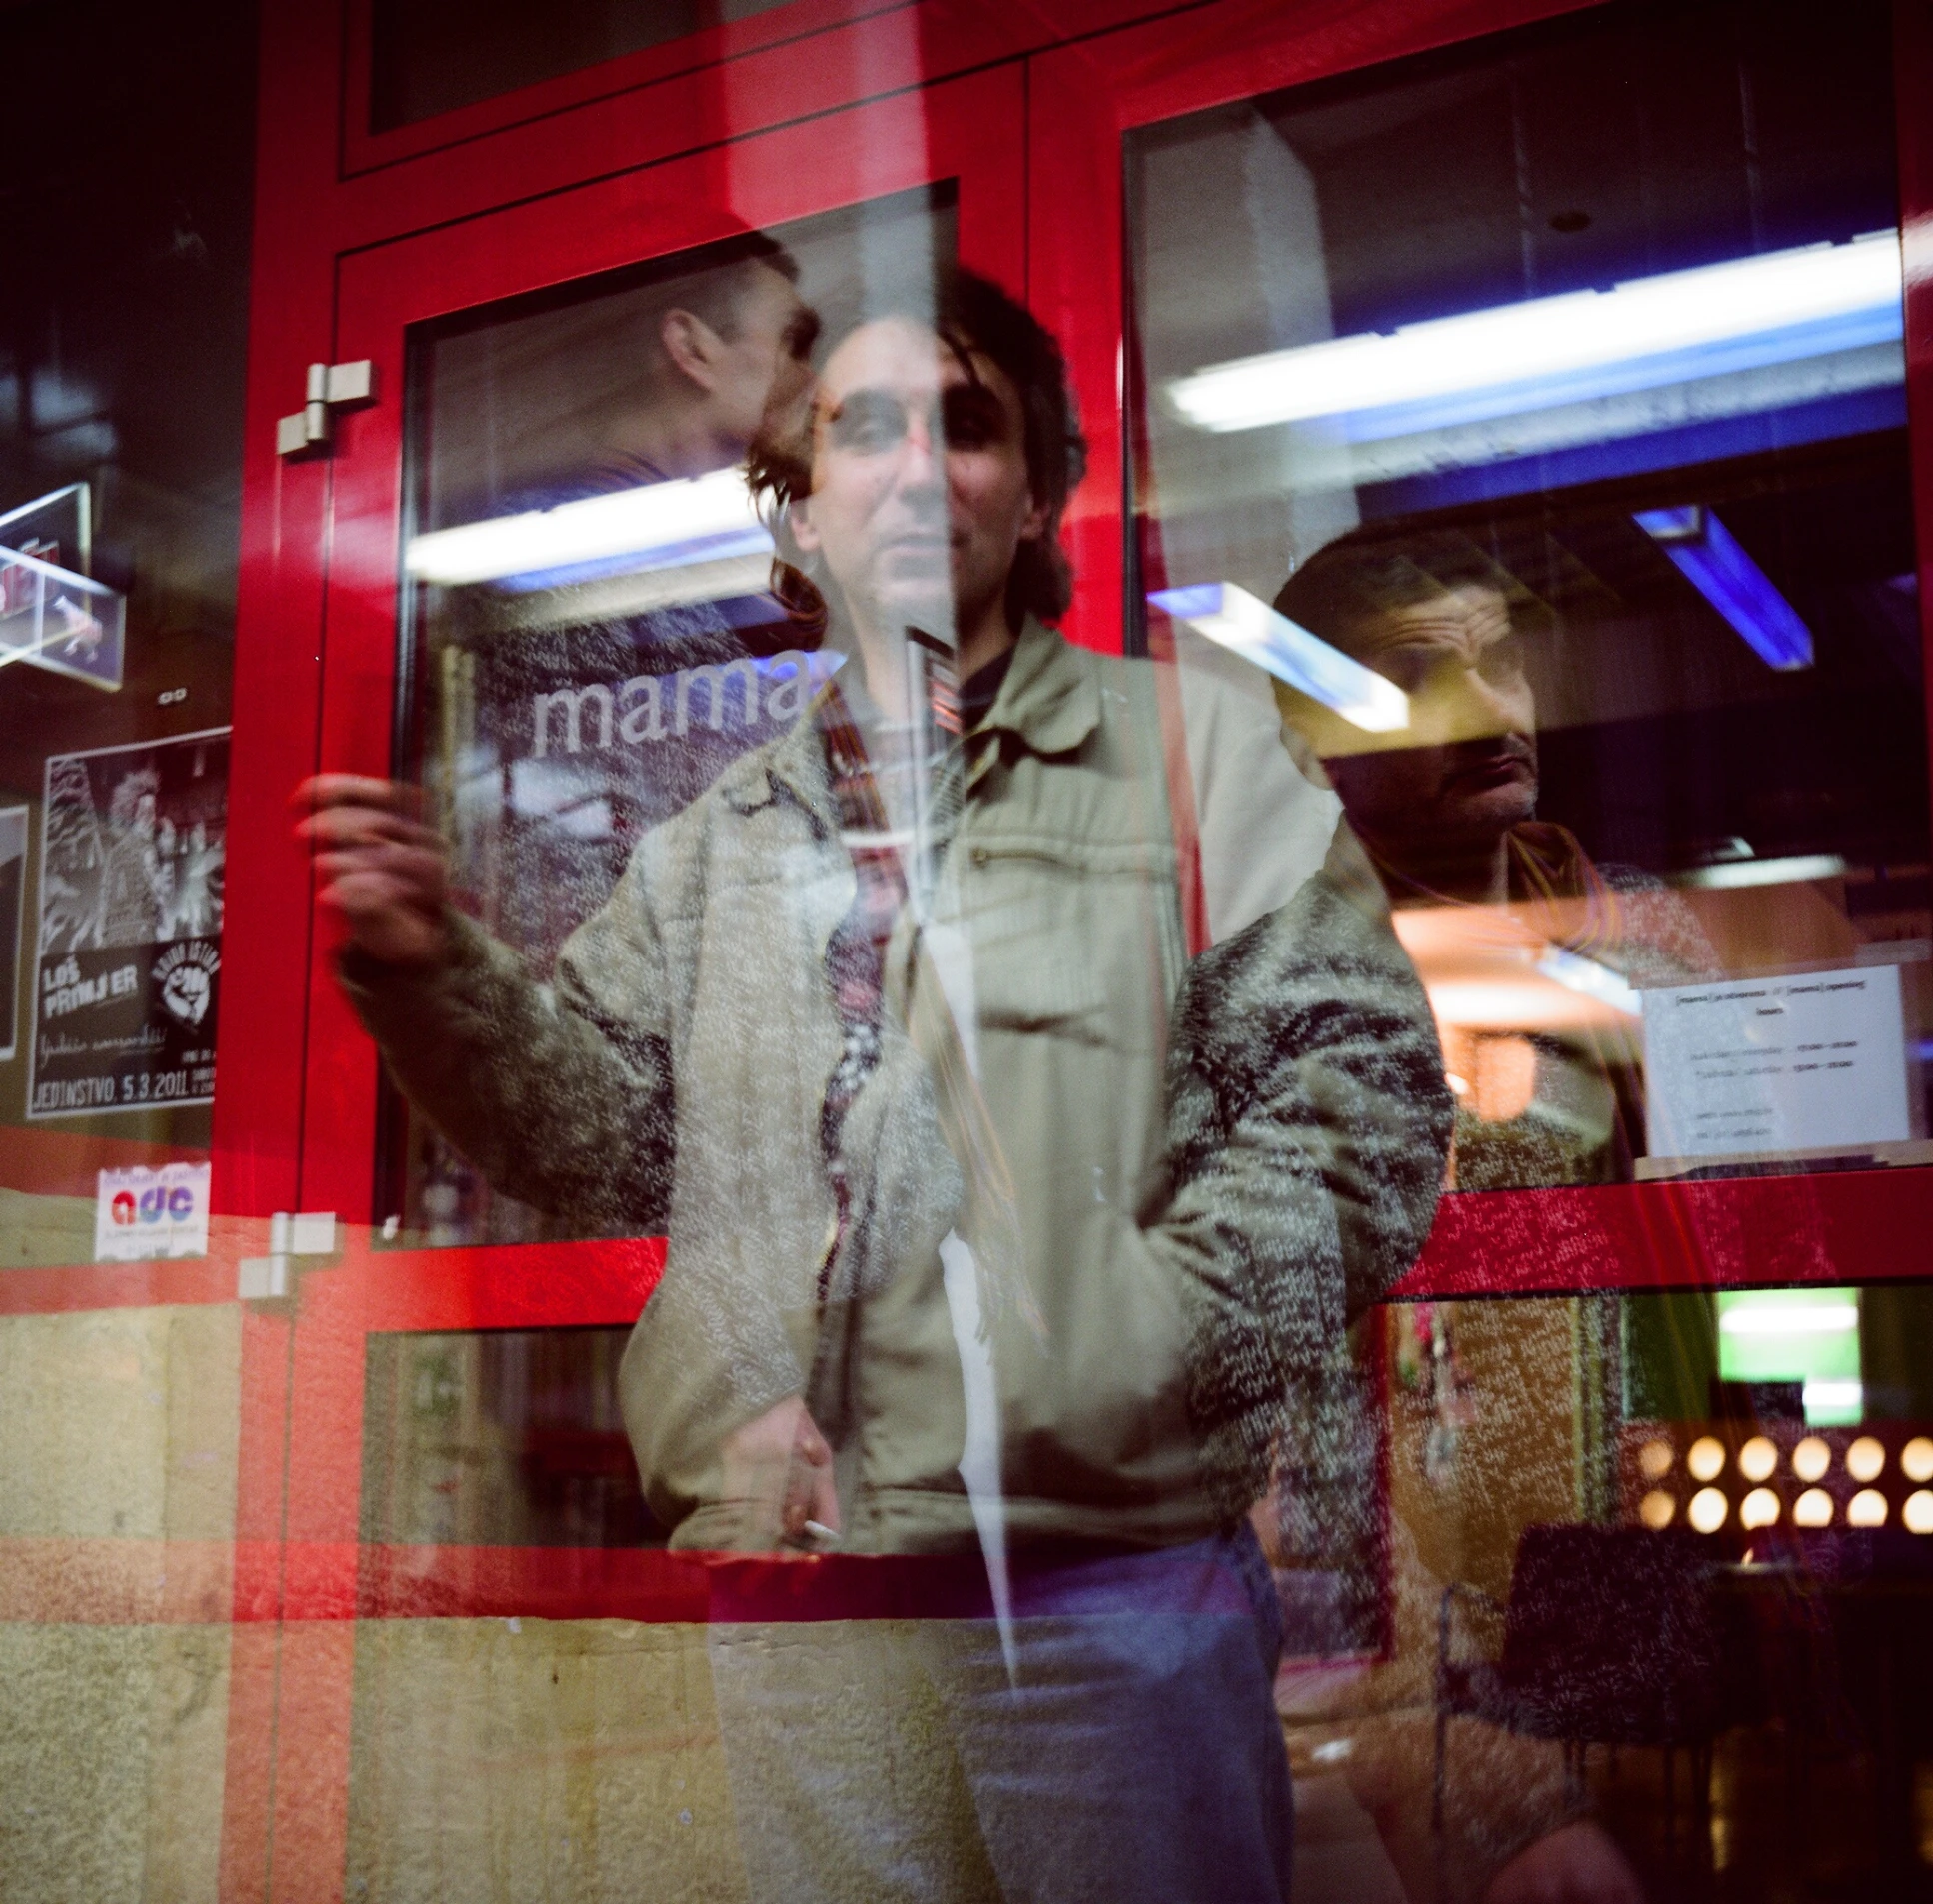 a man standing in front of a store window